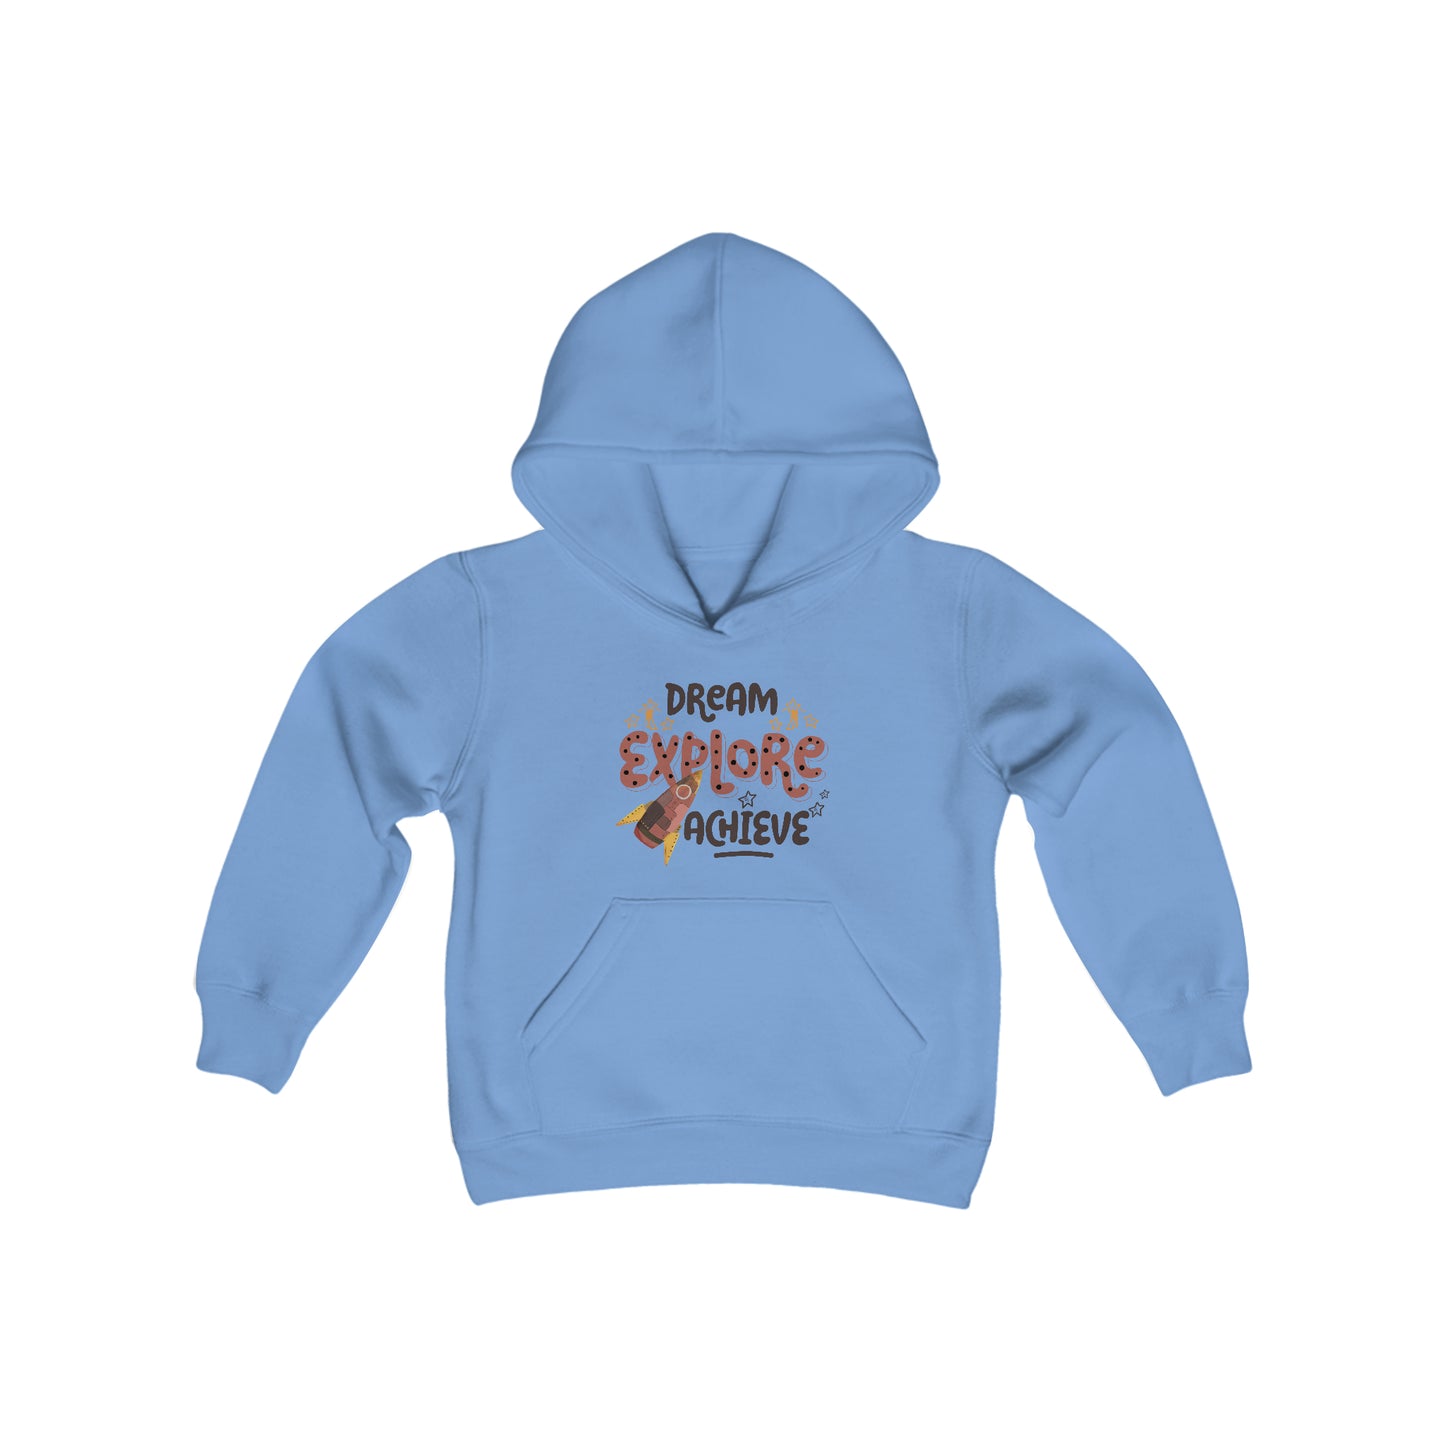 Youth Heavy Blend Hooded Sweatshirt - Dream, Explore, and Achieve